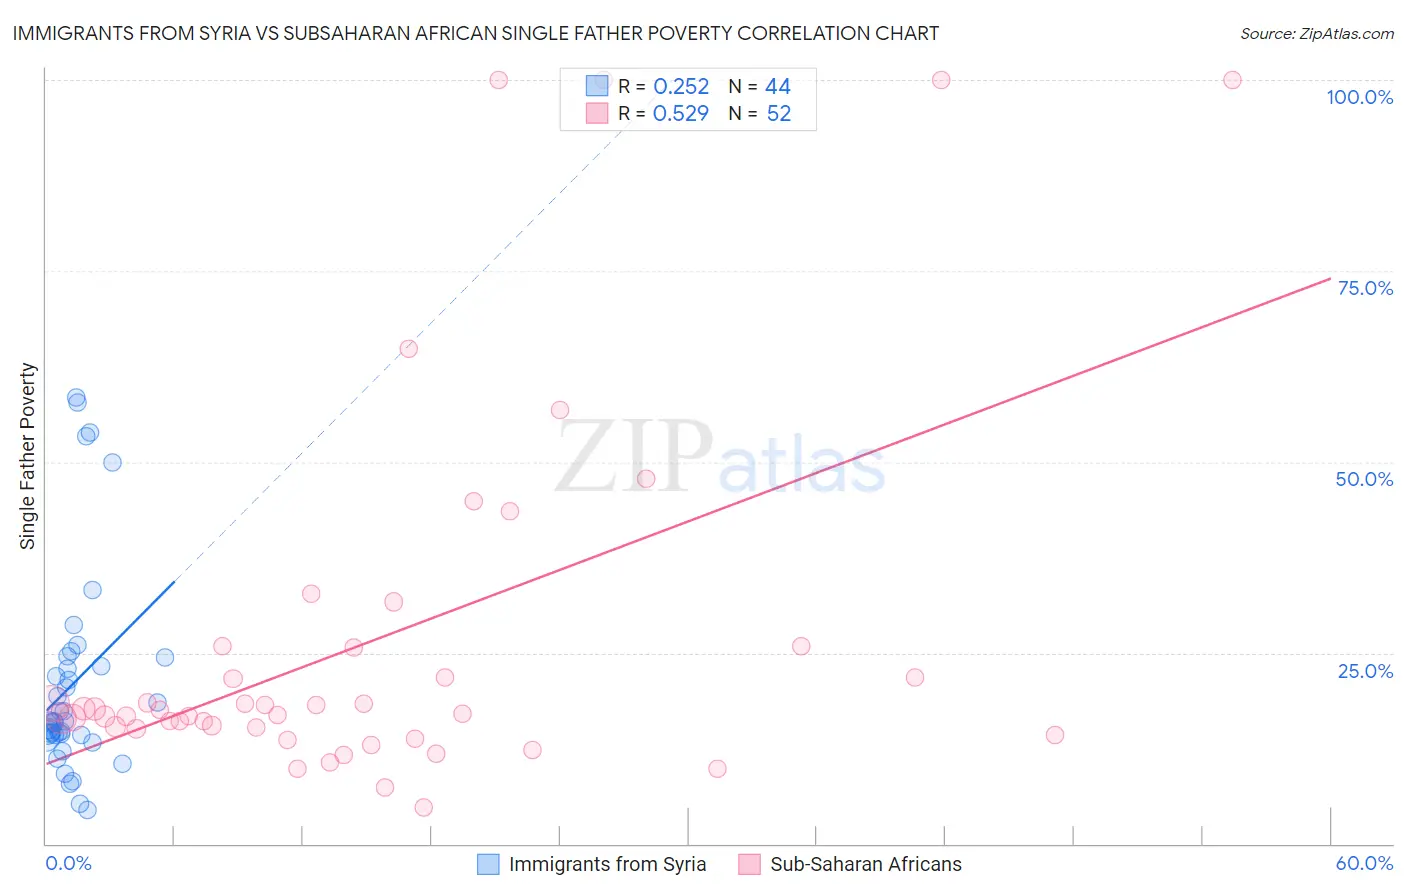 Immigrants from Syria vs Subsaharan African Single Father Poverty